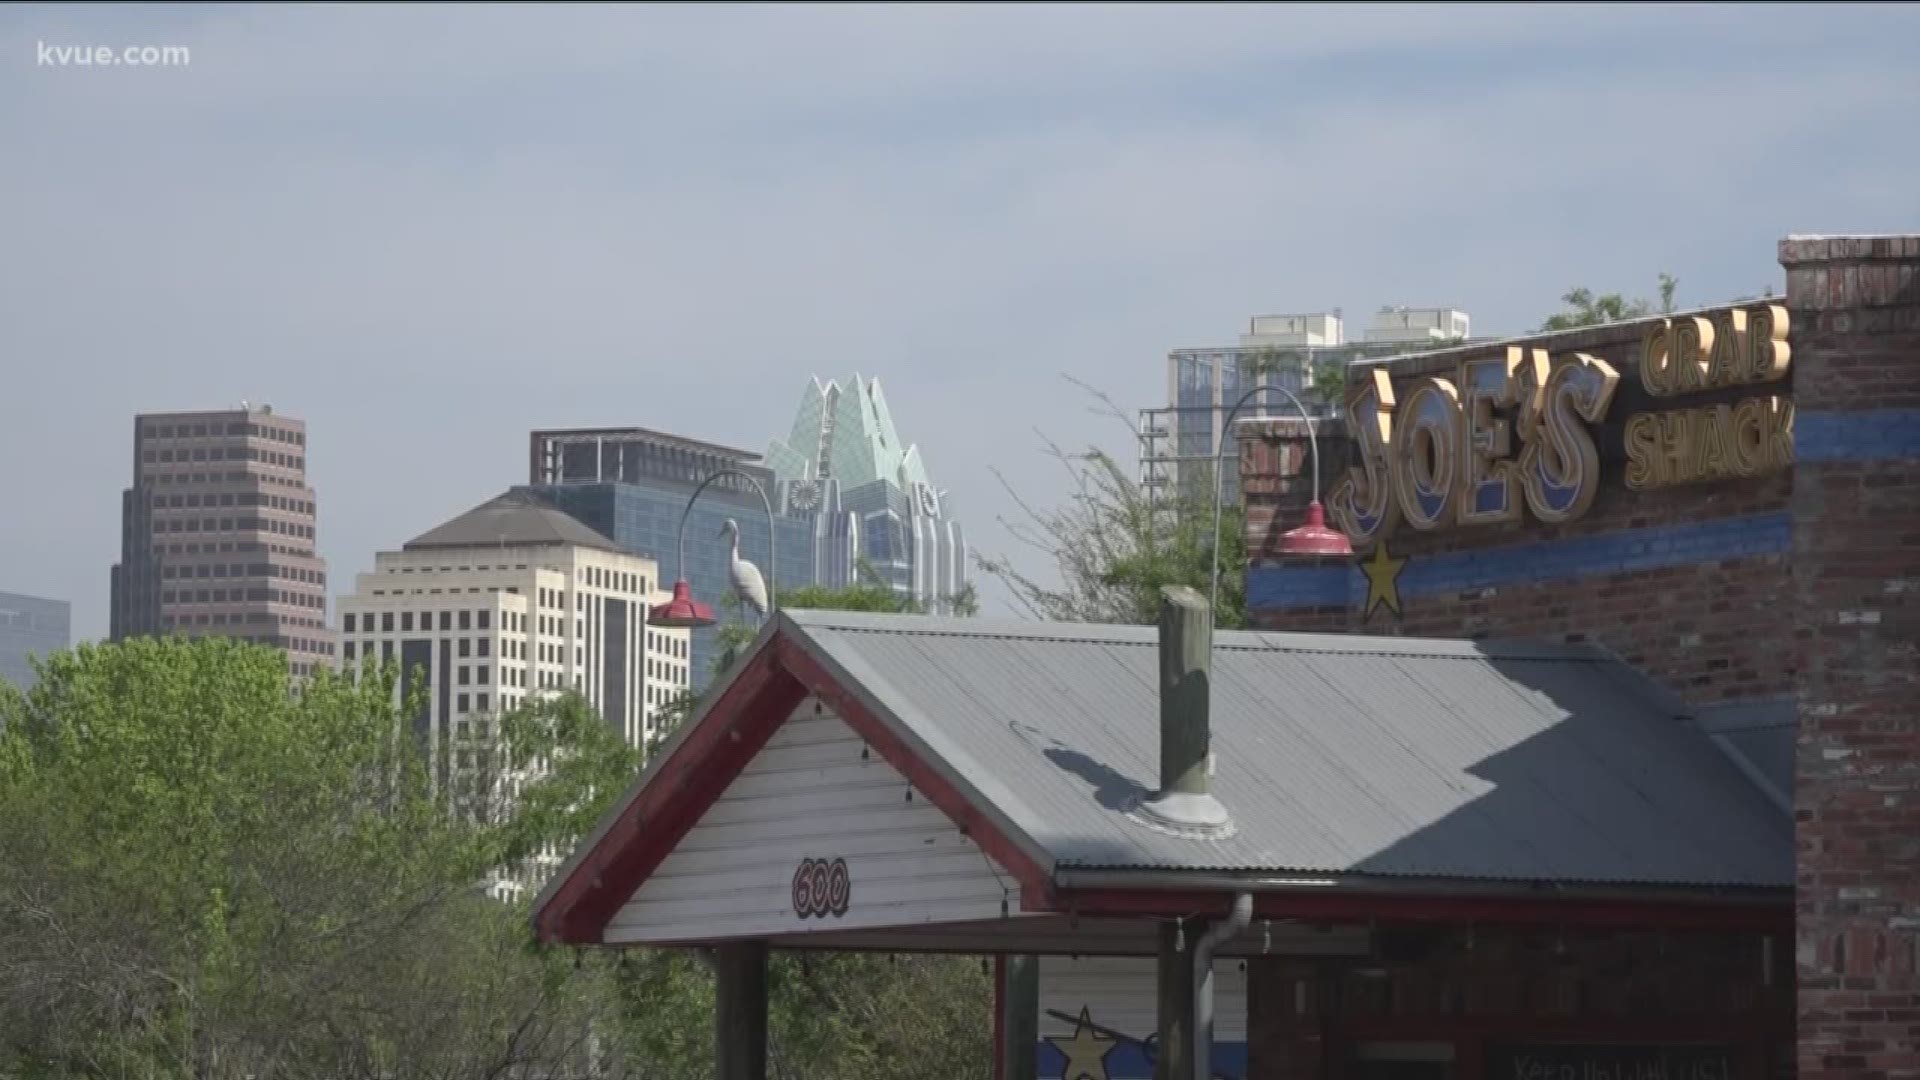 For 16 years, it has sat right by Lady Bird Lake. Now the Joe's Crab Shack by the boardwalk is closing.